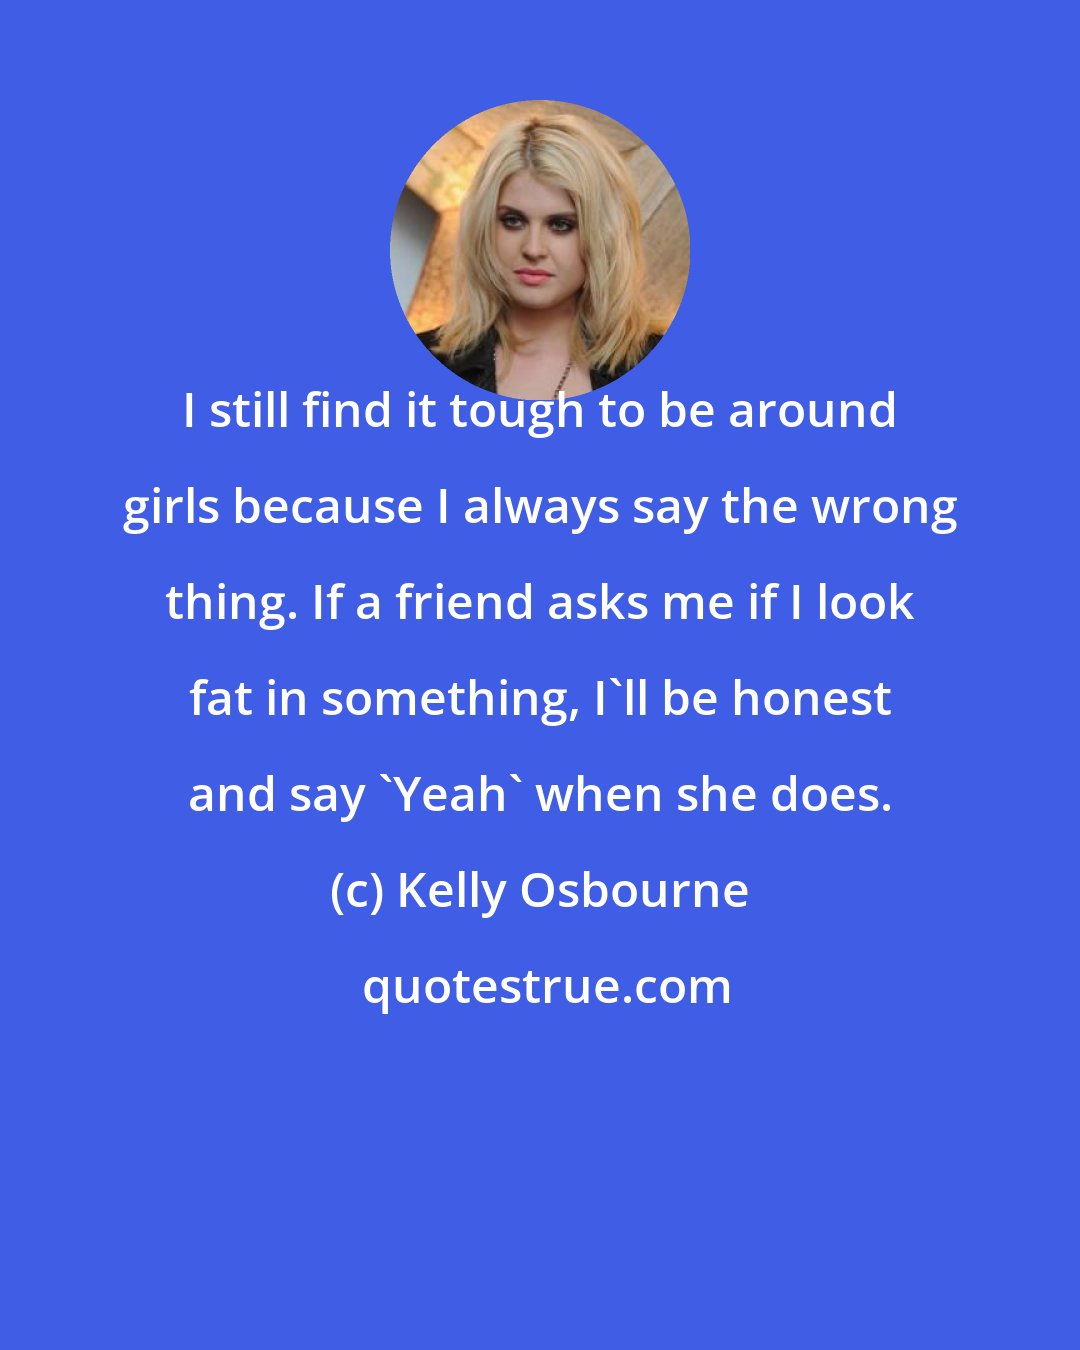 Kelly Osbourne: I still find it tough to be around girls because I always say the wrong thing. If a friend asks me if I look fat in something, I'll be honest and say 'Yeah' when she does.